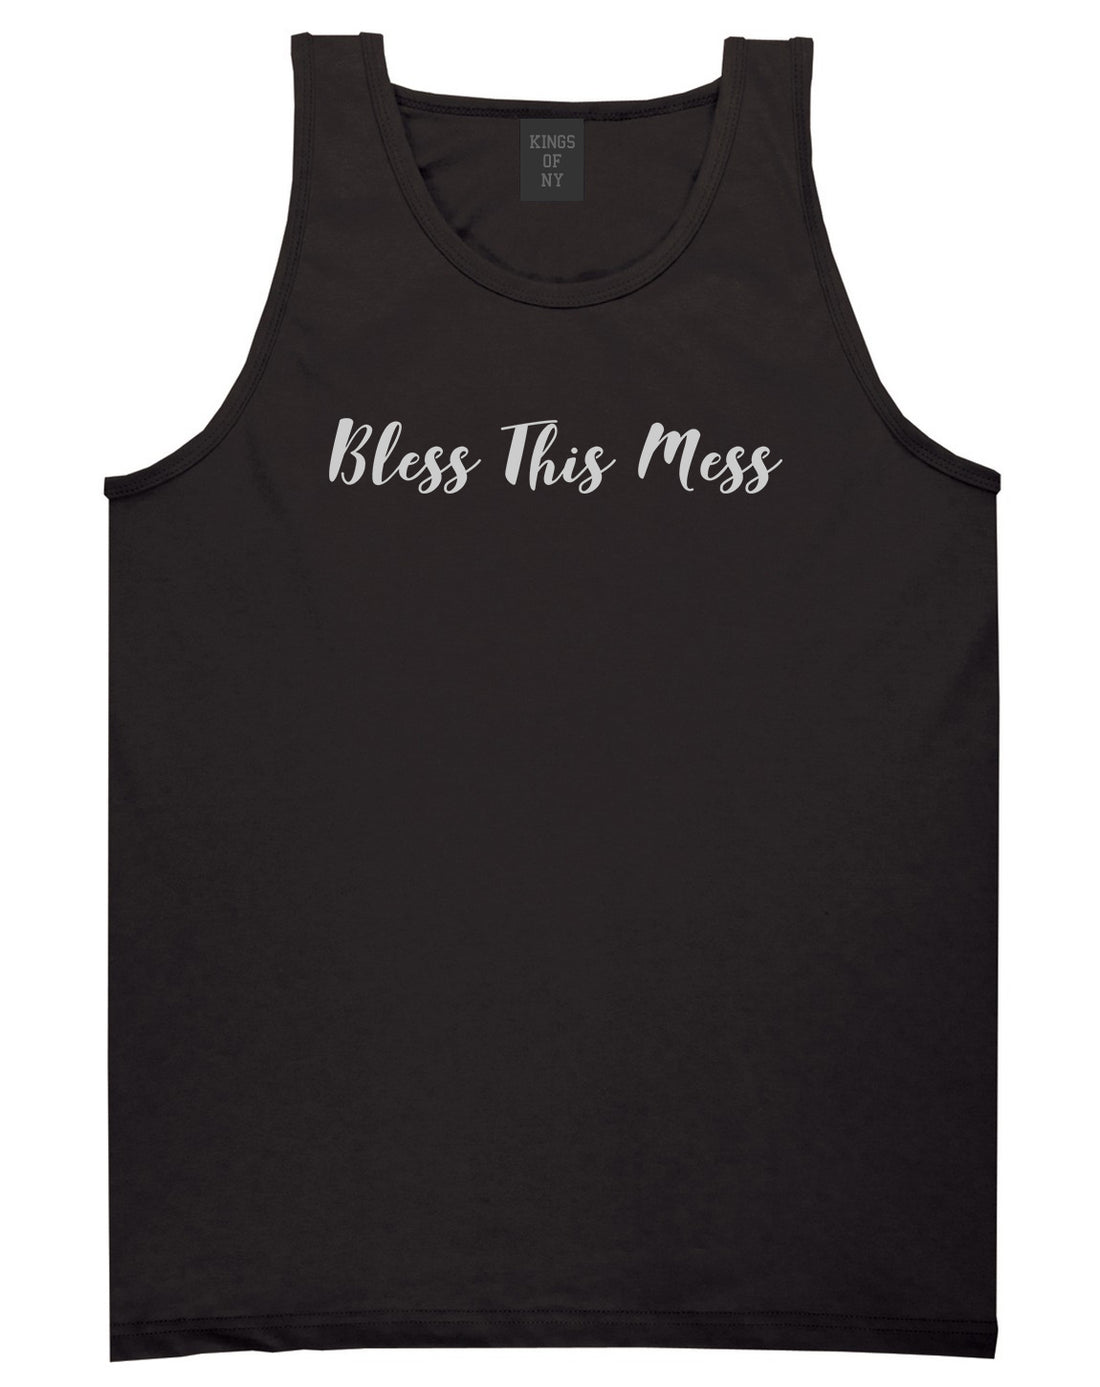 Bless This Mess Black Tank Top Shirt by Kings Of NY